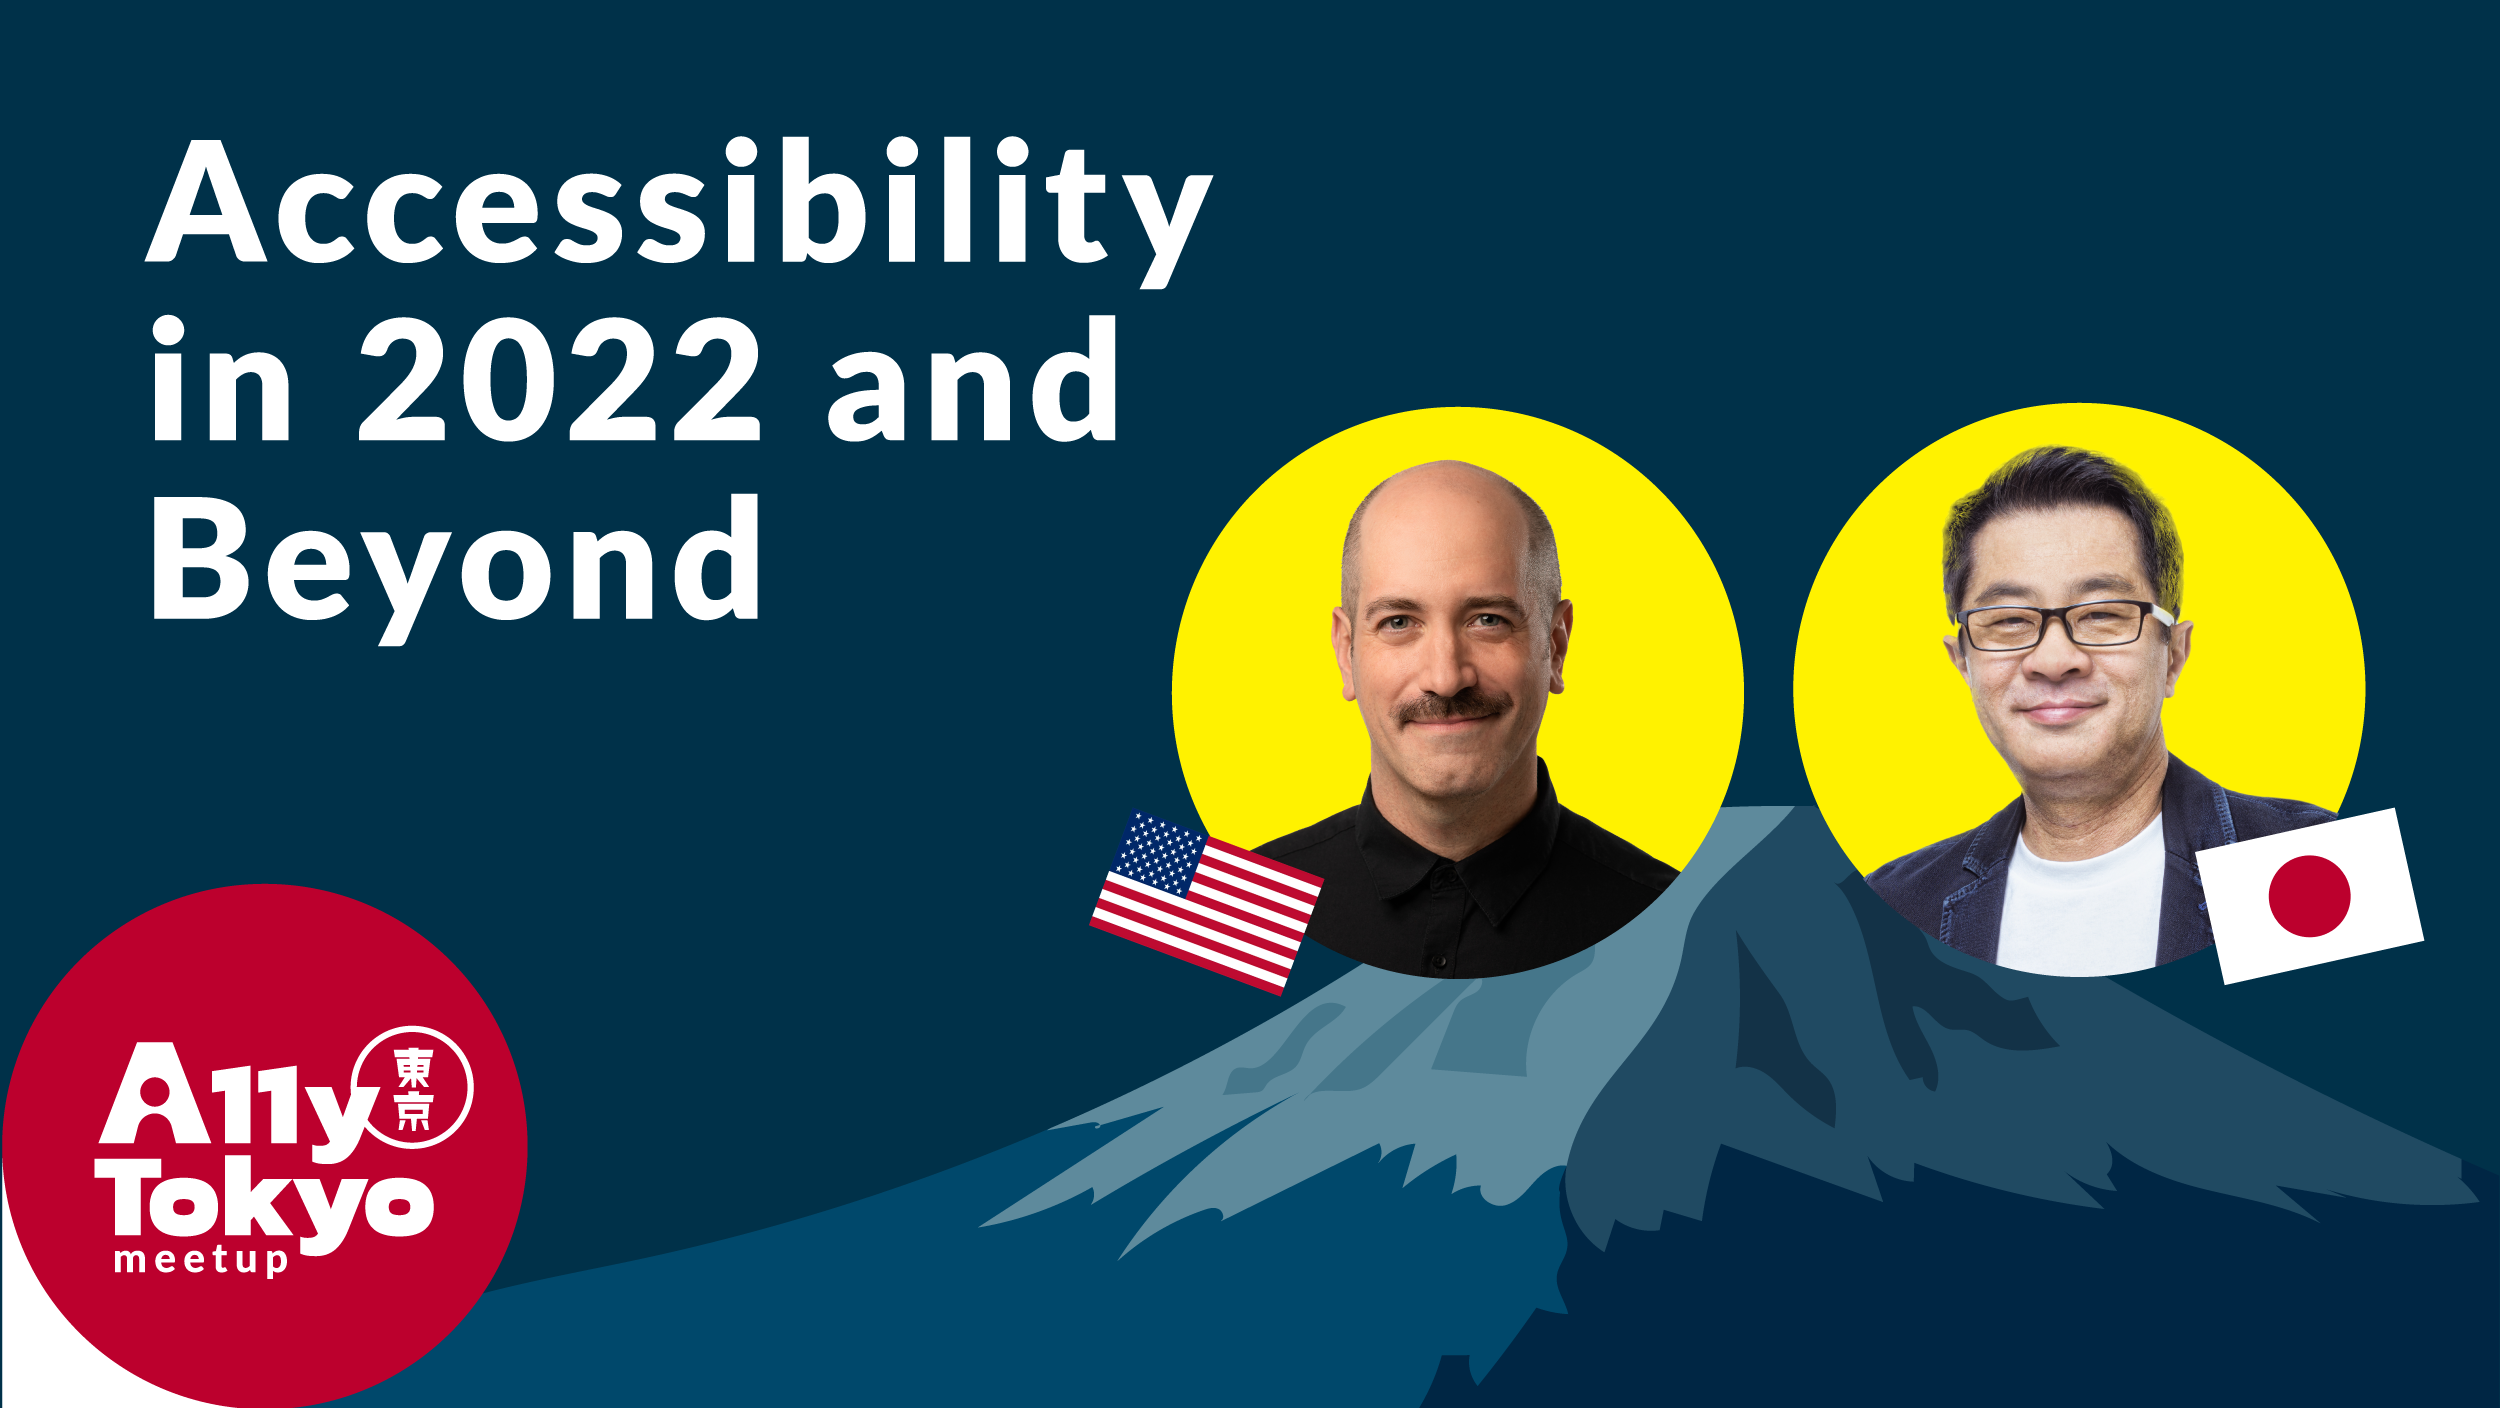 Accessibility 2022 and beyond. A11yTokyo. Illustration of Mt. Fuji with photos of Thomas with US flag and Makoto with Japanese flag.